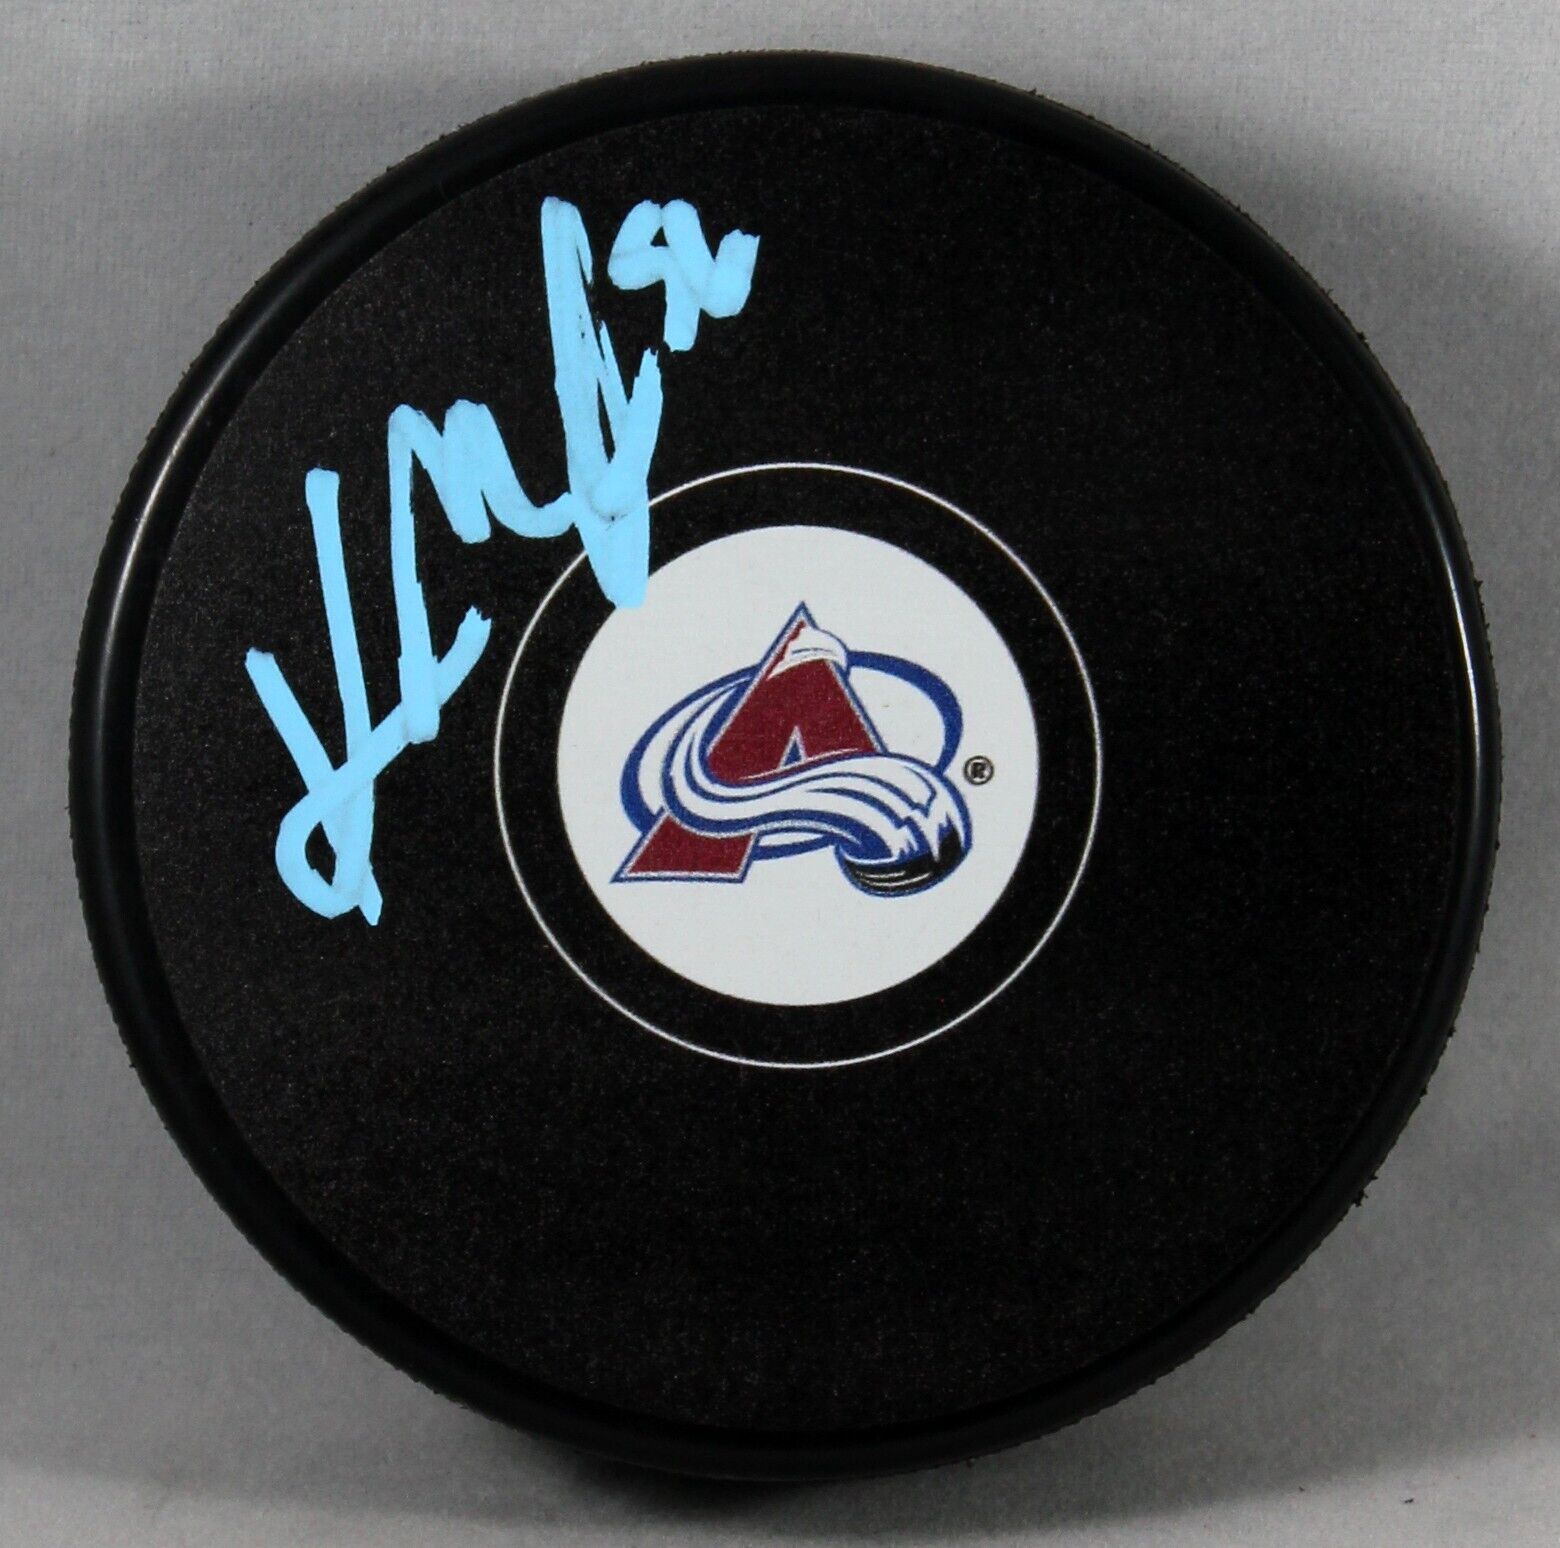 KURTIS MACDERMID SIGNED COLORADO AVALANCHE PUCK NHL STANLEY CUP AUTOGRAPHED +COA